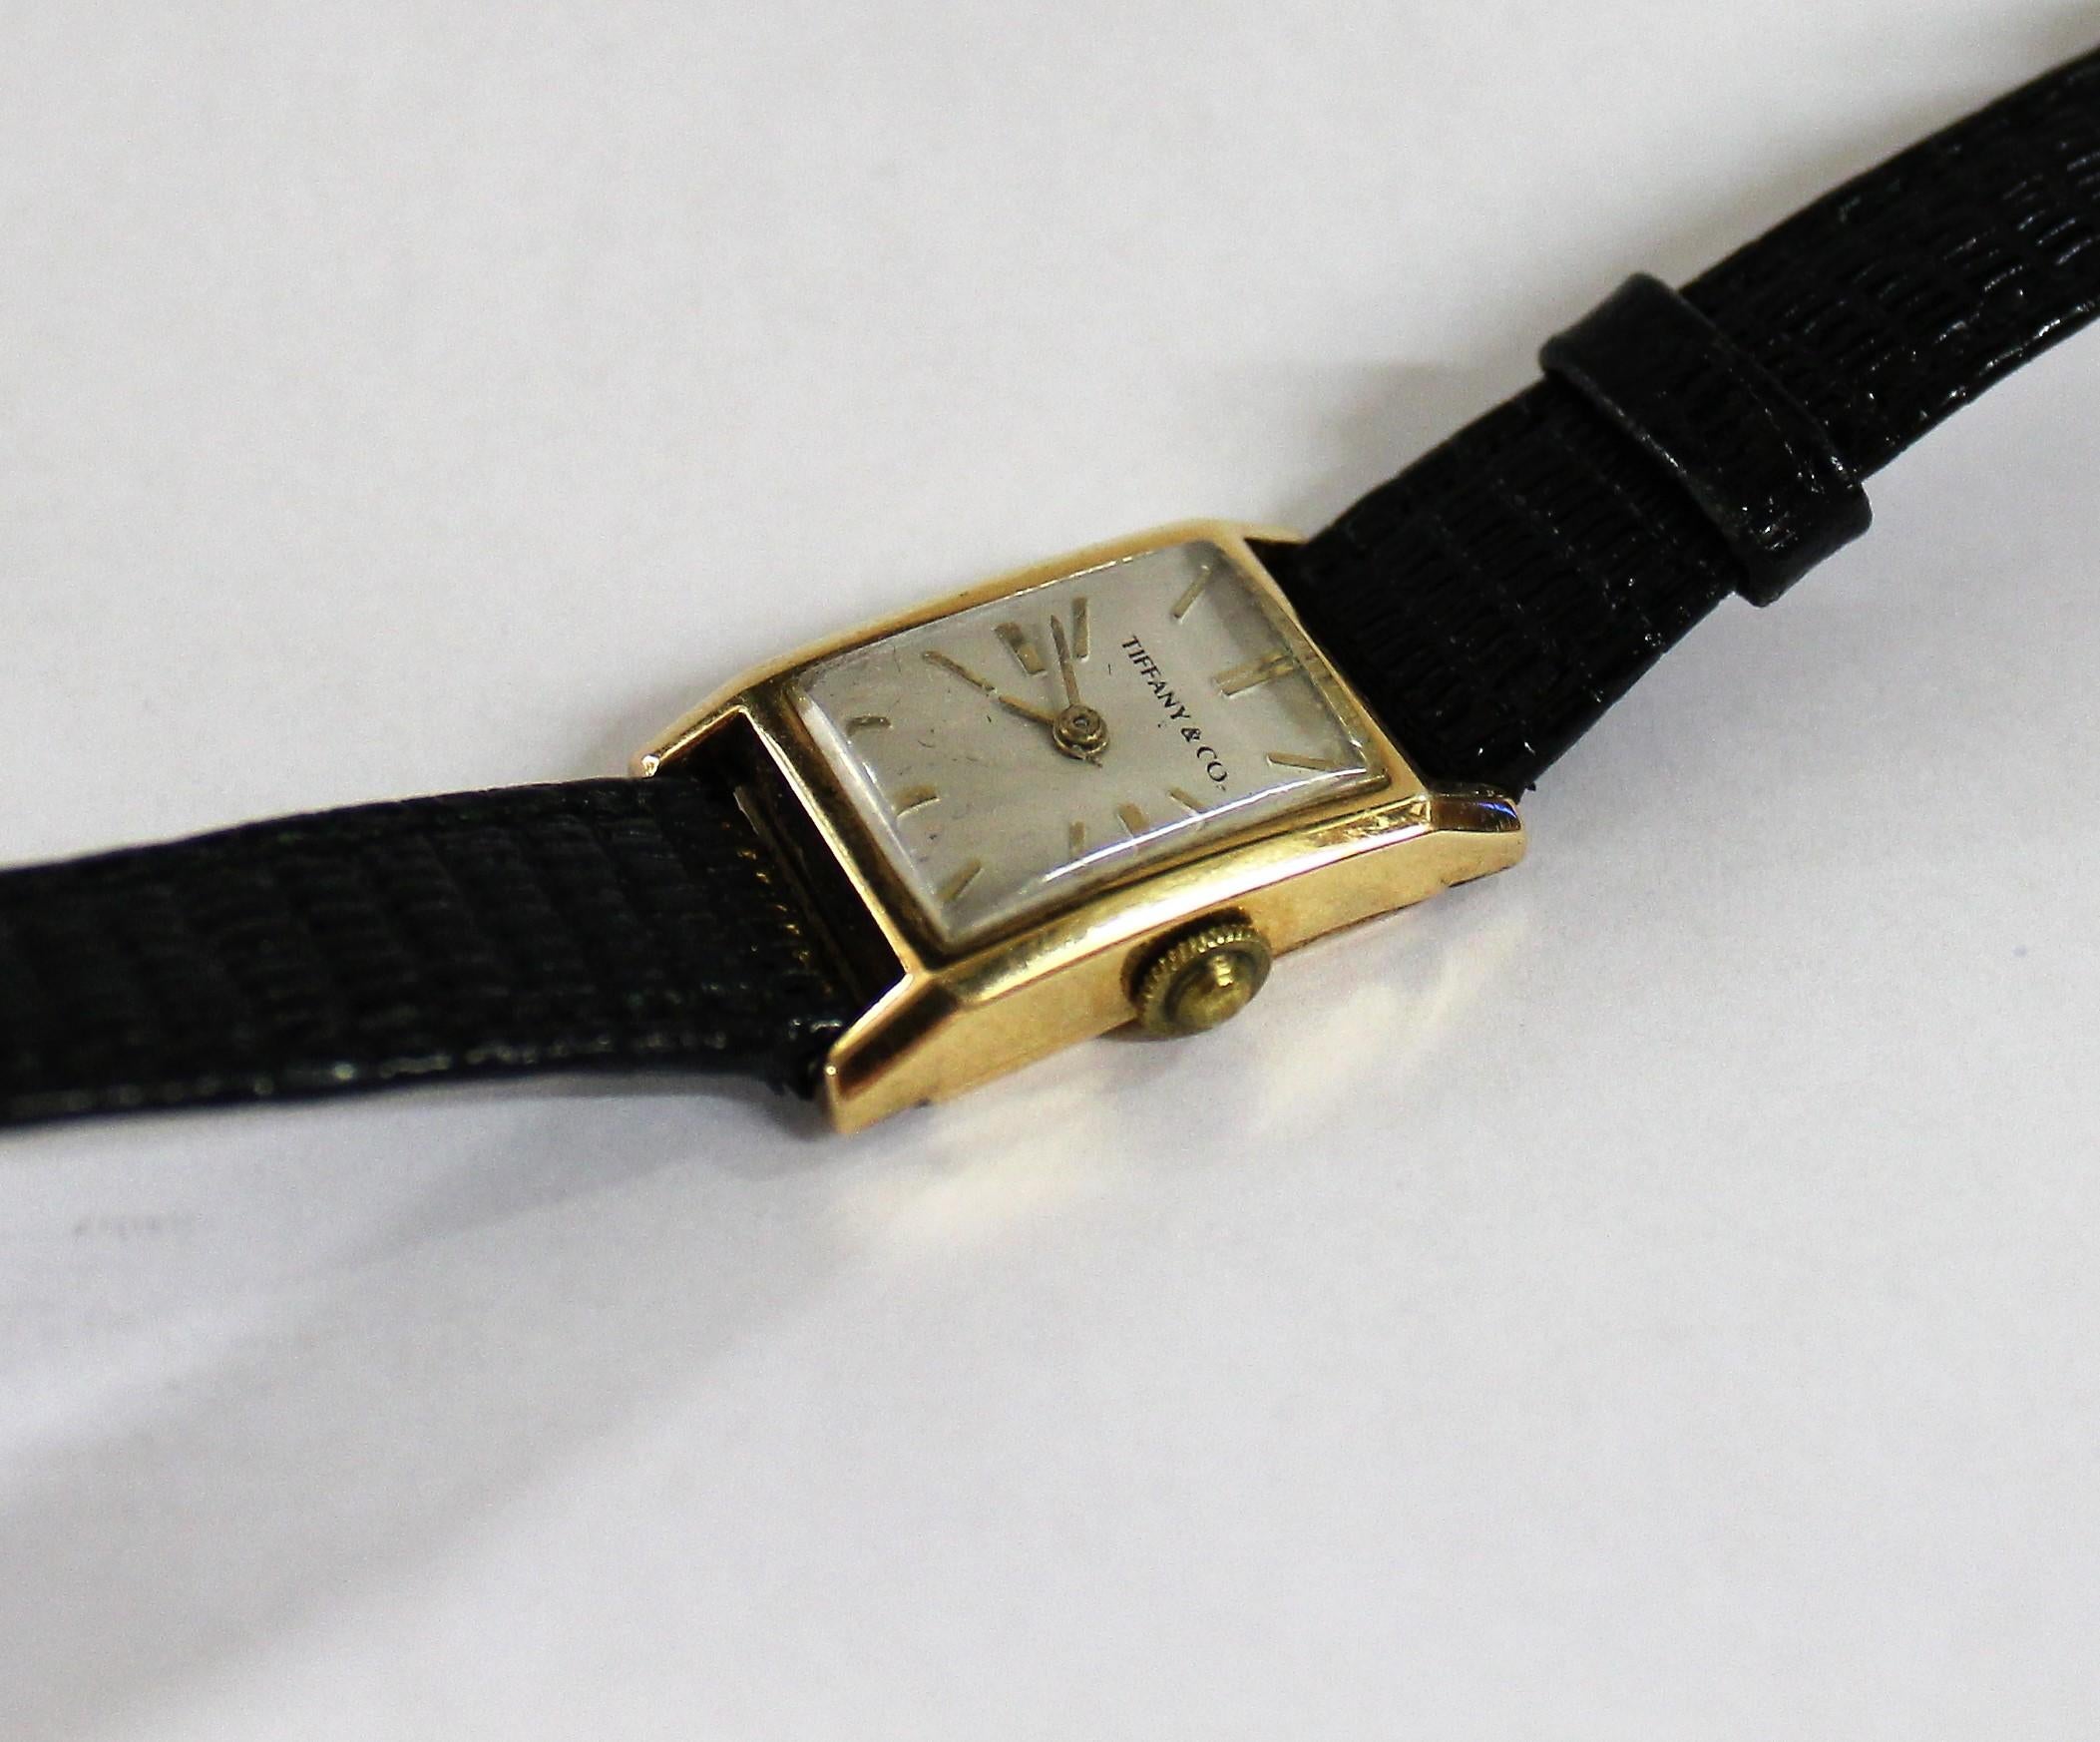 Elegant vintage Tiffany & Co. manual wind dress watch made with 18-karat yellow gold. It is slender and has a soft rectangular design.